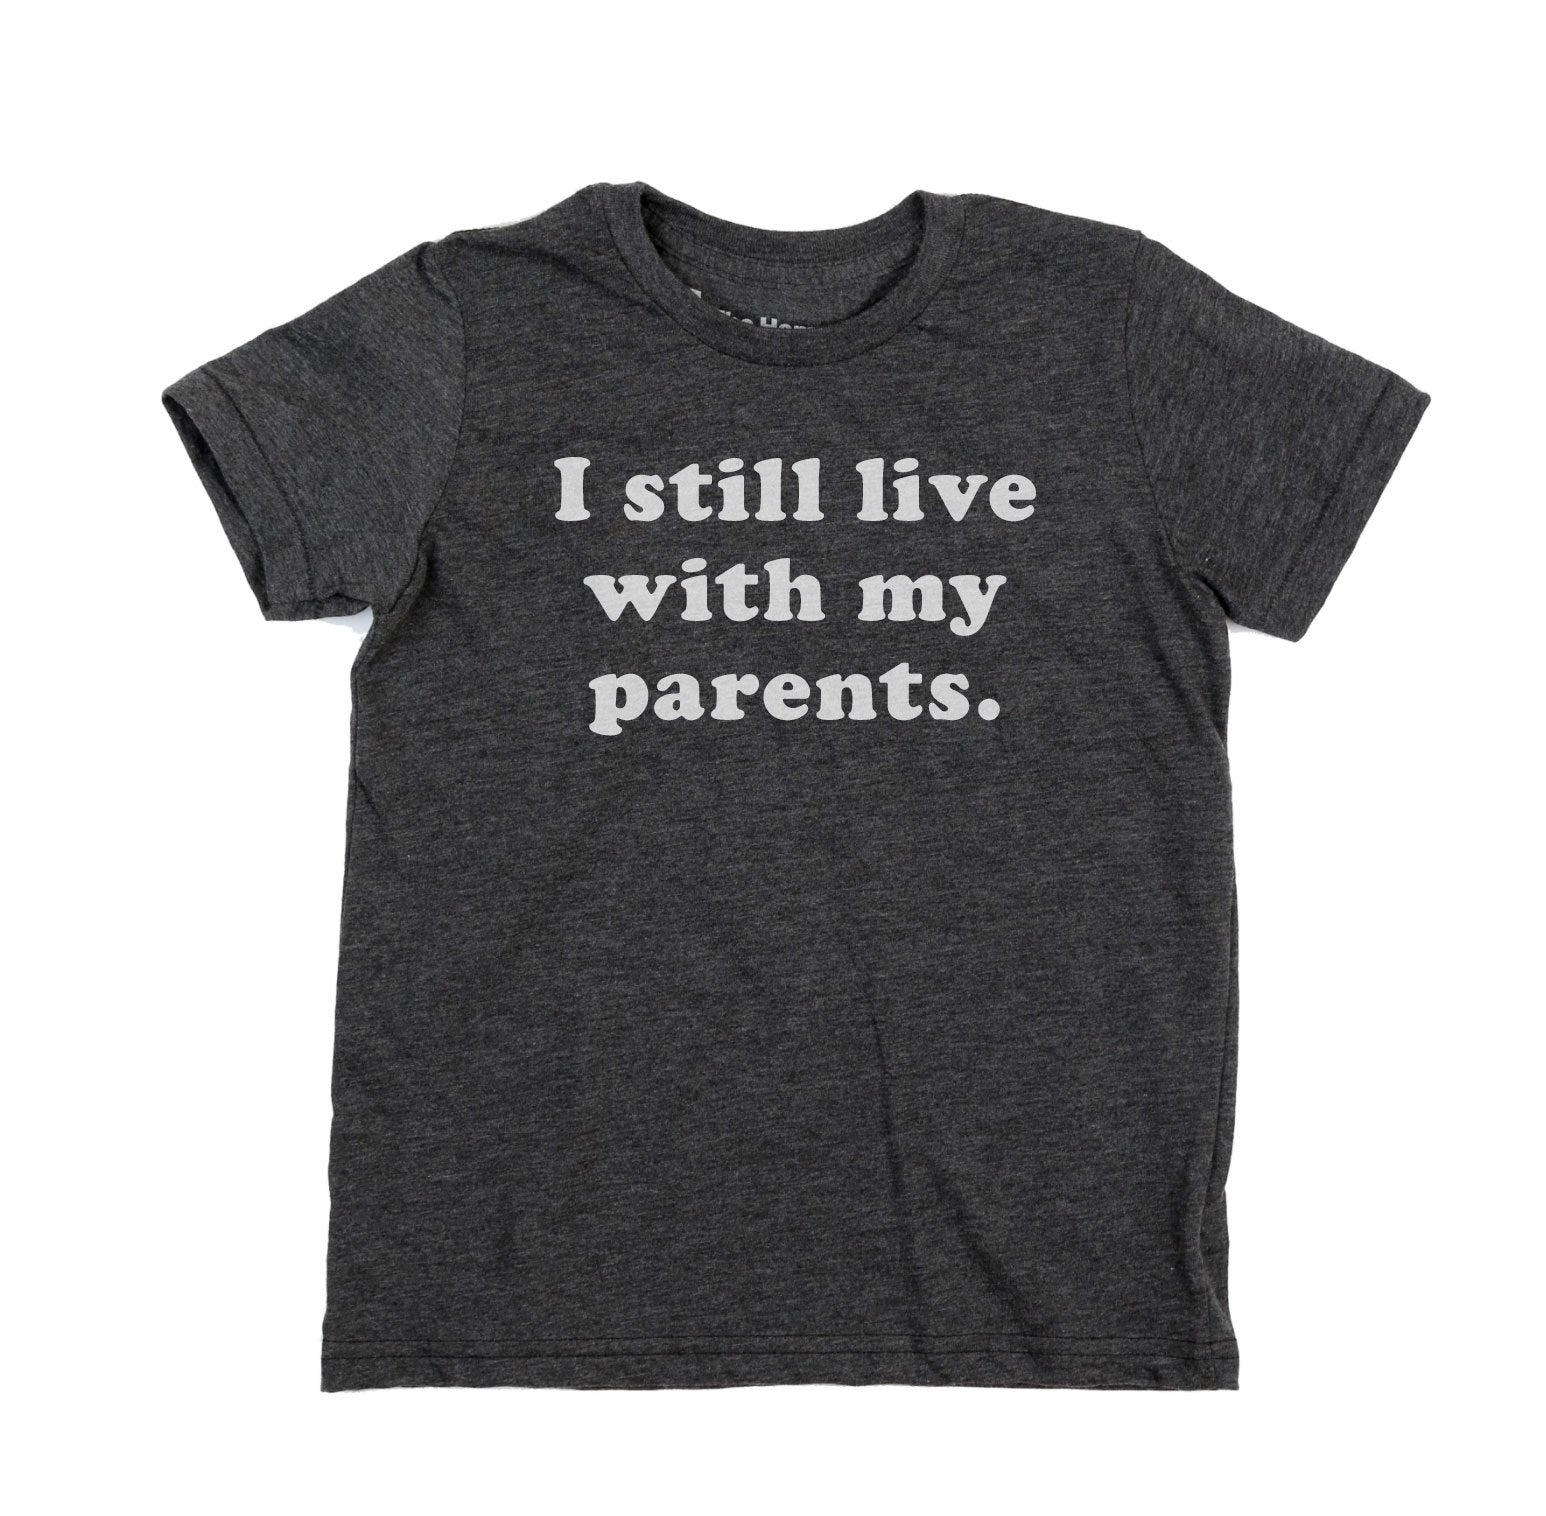 I still live with my parents